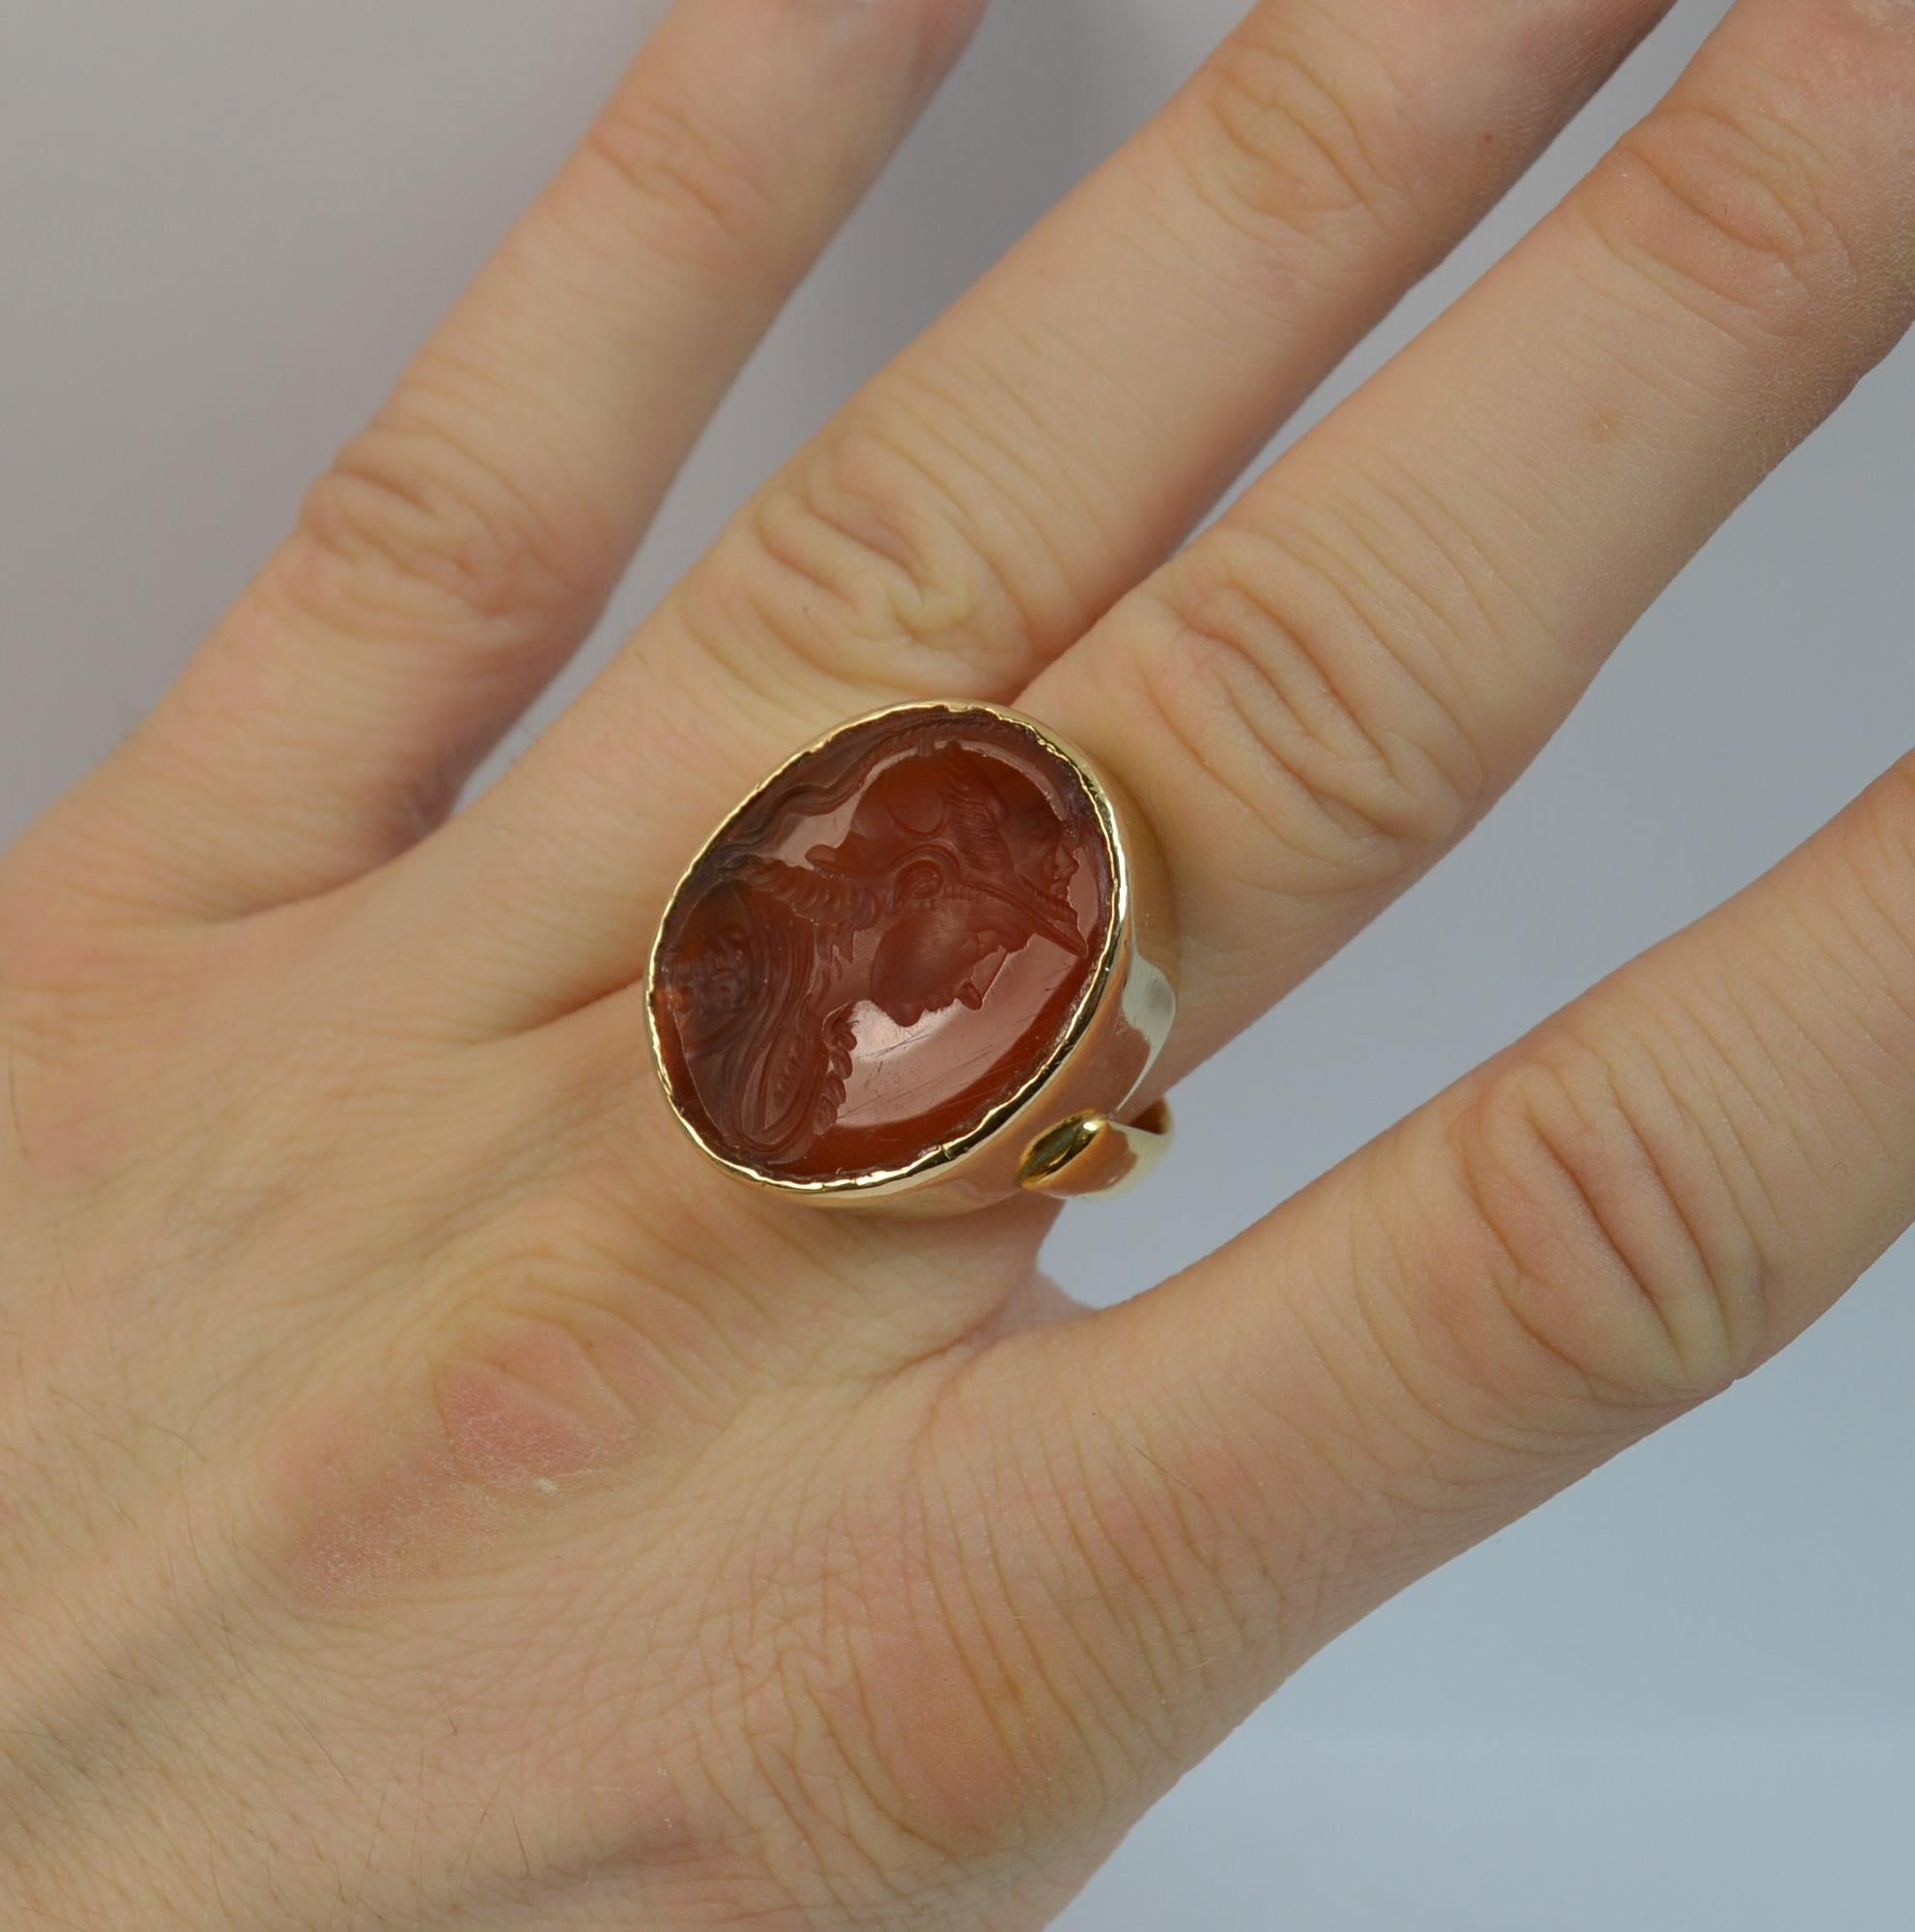 
A stunning 22 carat gold and carnelian ring.

20mm x 25mm oval shaped carnelian with a top quality intaglio carving of the Roman God Mercury.

He is the god of financial gain, commerce, eloquence, messages, communication, travelers, boundaries,